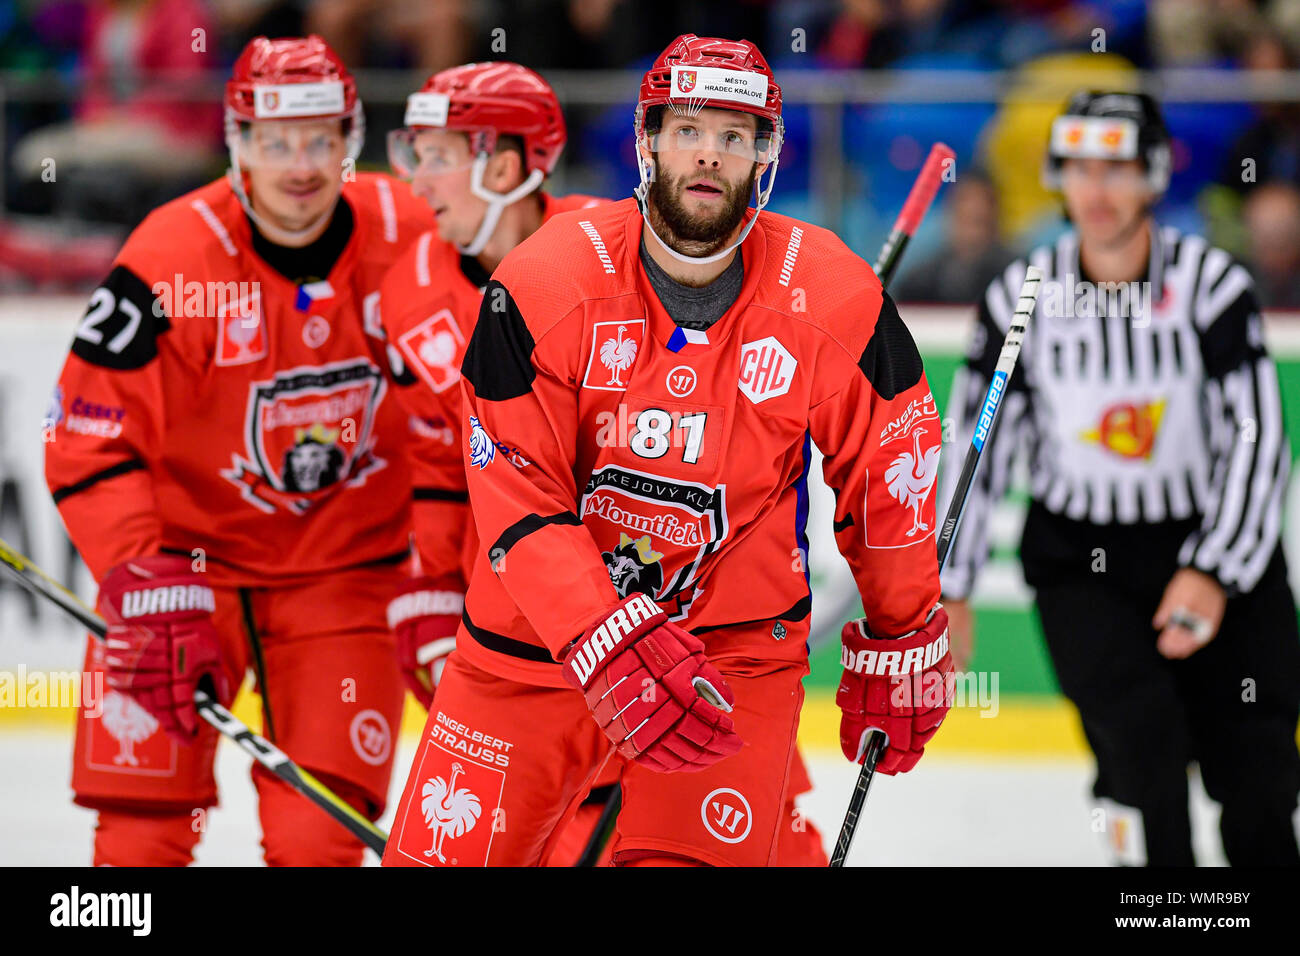 From left hockey player TOMAS VINCOUR of Hradec Kralove in action during  the Champions Hockey League H group game: Hradec Kralove vs Cardiff Devils  in Hradec Kralove, Czech Republic, September 5, 2019. (